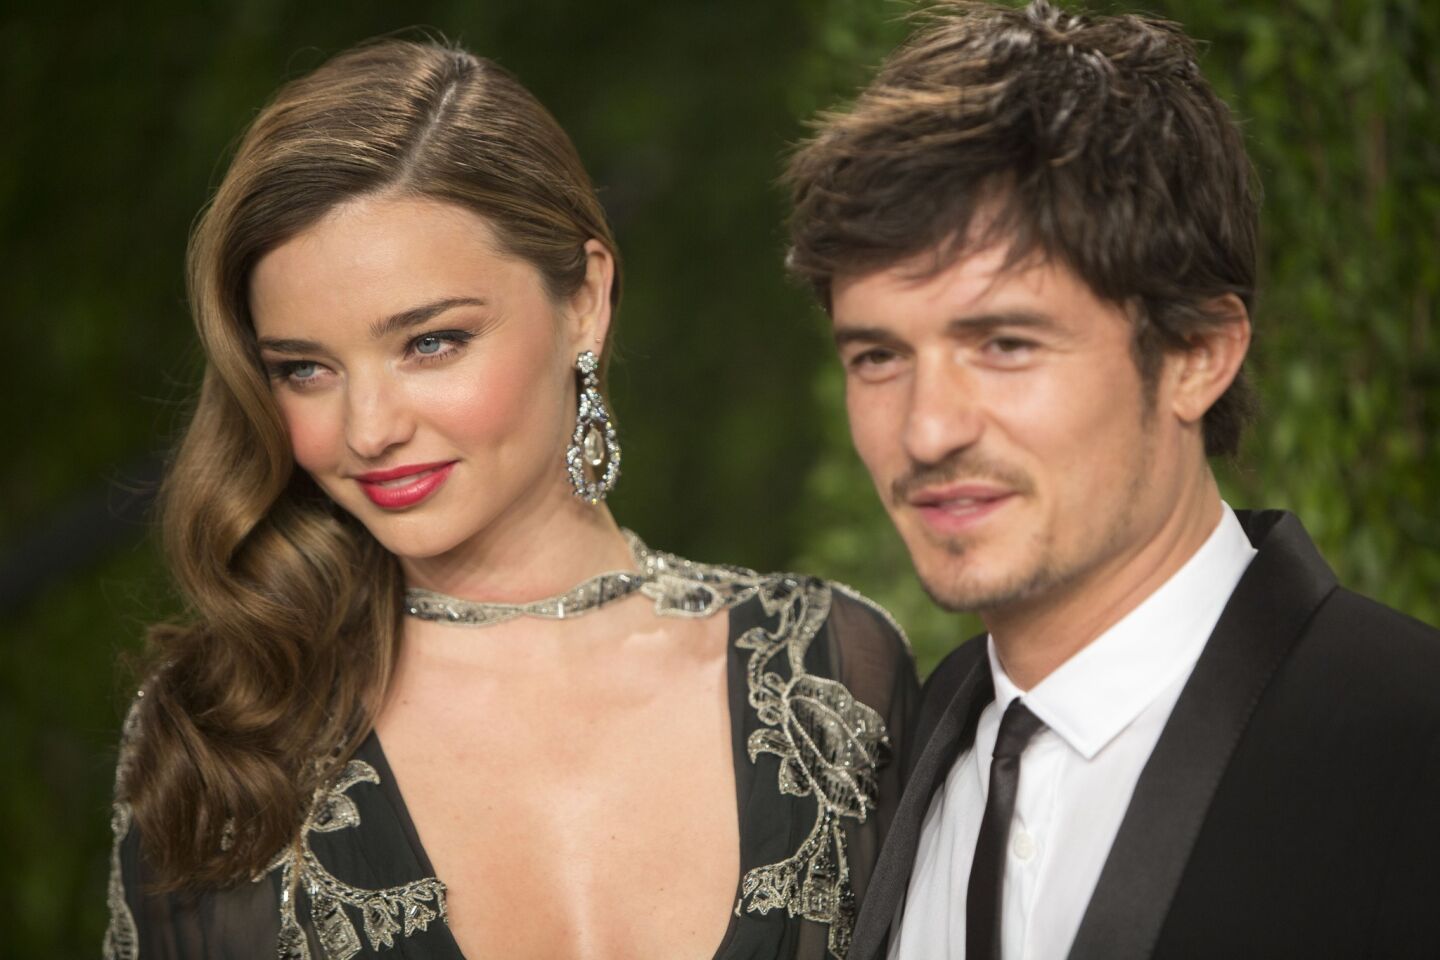 Supermodel Miranda Kerr and actor Orlando Bloom have separated, ending their three-year marriage and six-year relationship. "They have been amicably separated for the past few months," said a joint statement in October. "After six years together, they have recently decided to formalize their separation. Despite this being the end of their marriage, they love, support and respect each other as both parents of their son and as family." The Victoria's Secret Angel and "Pirates of the Caribbean" actor married in July 2010 and have a son named Flynn who was born on Jan. 6, 2011. MORE: Miranda Kerr, Orlando Bloom separate after three-year marriage